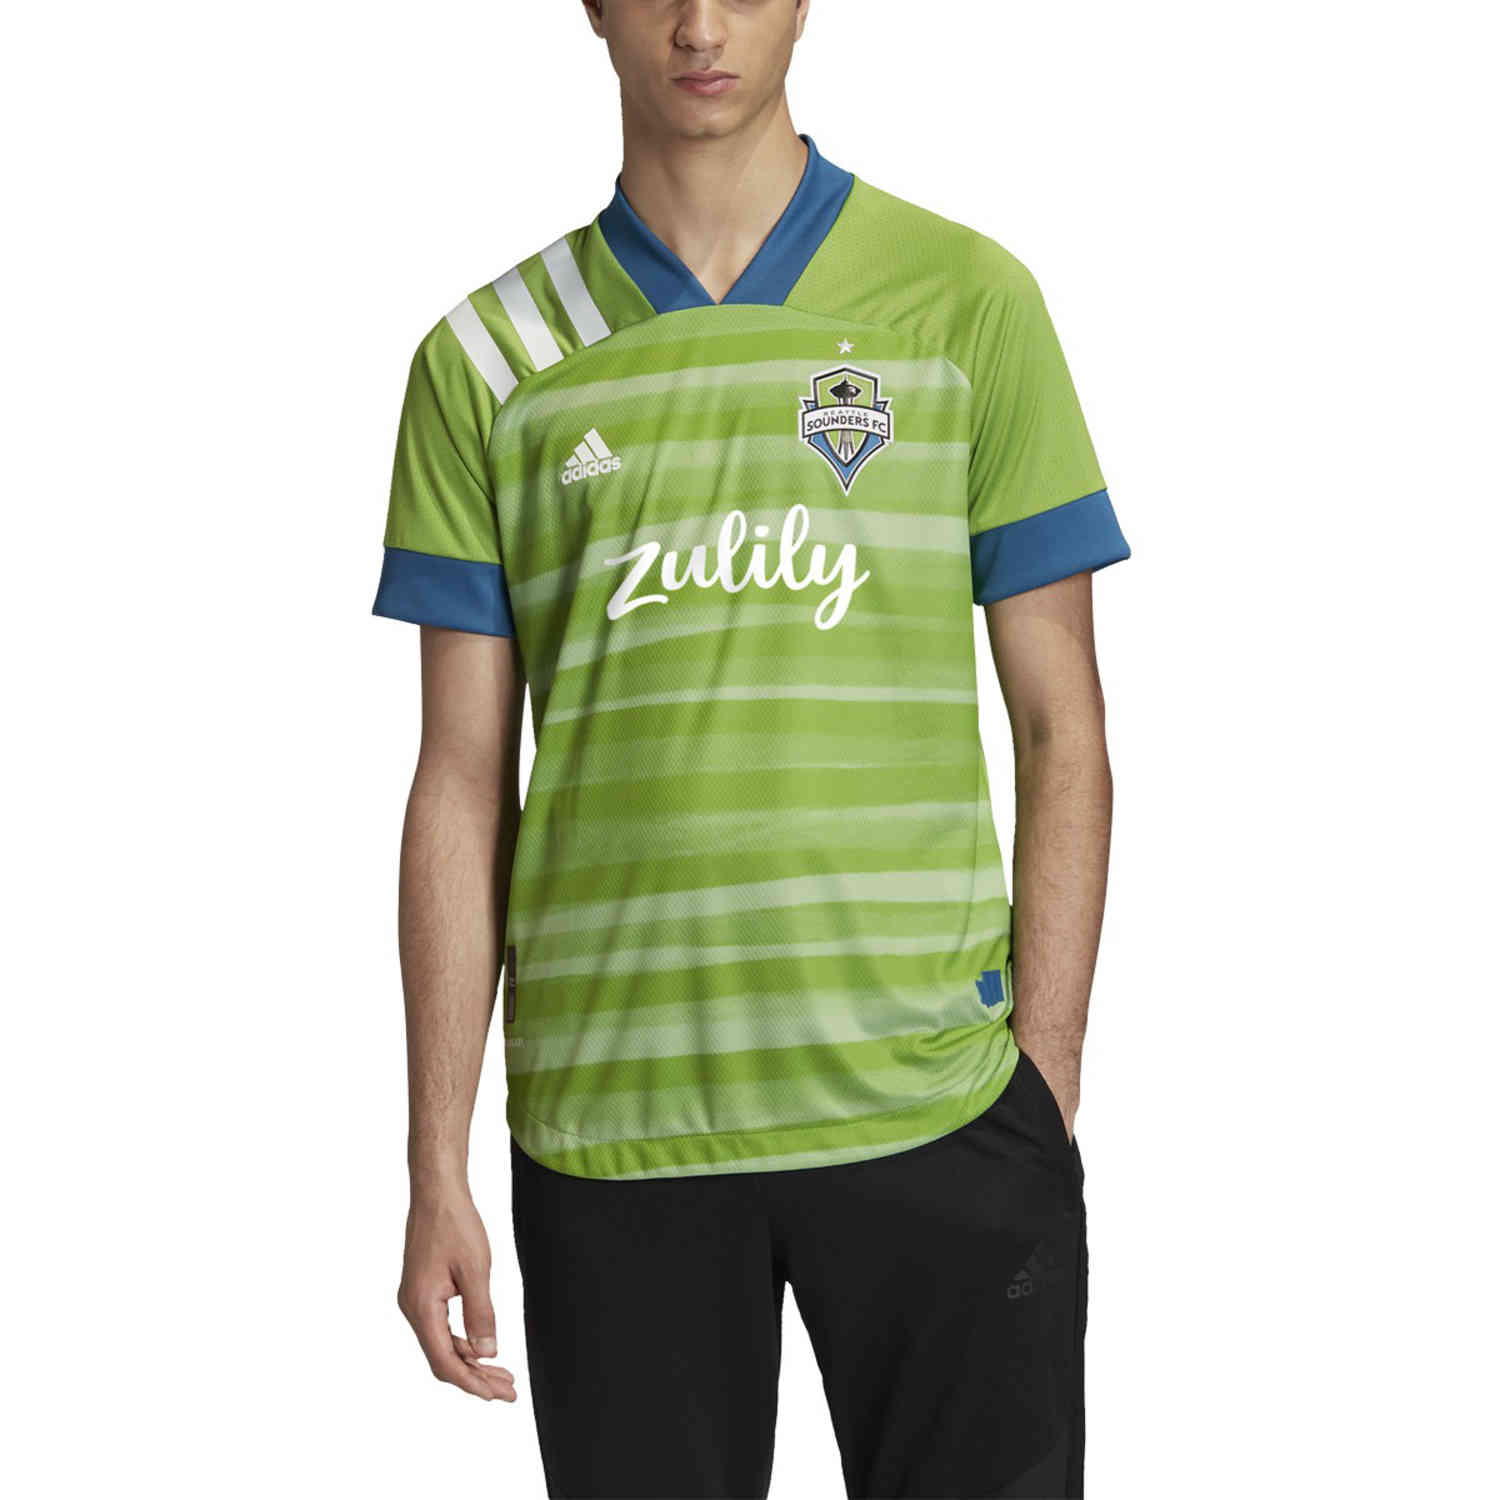 sounders new jersey 2020